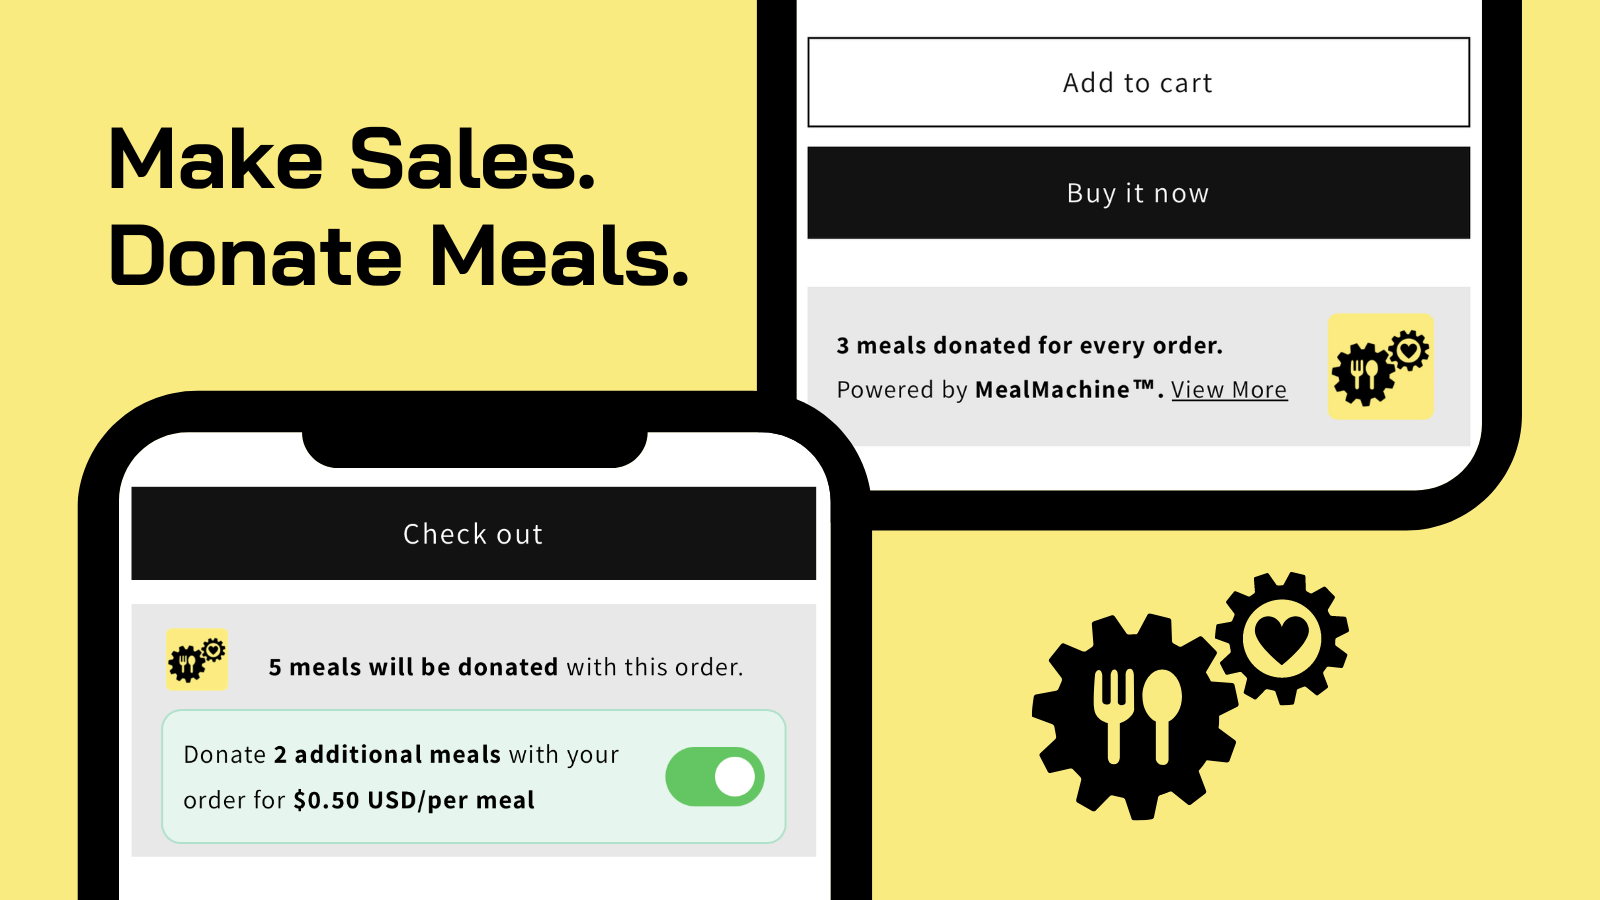 mealmachine-meal-donation-charity-cause-marketing-app